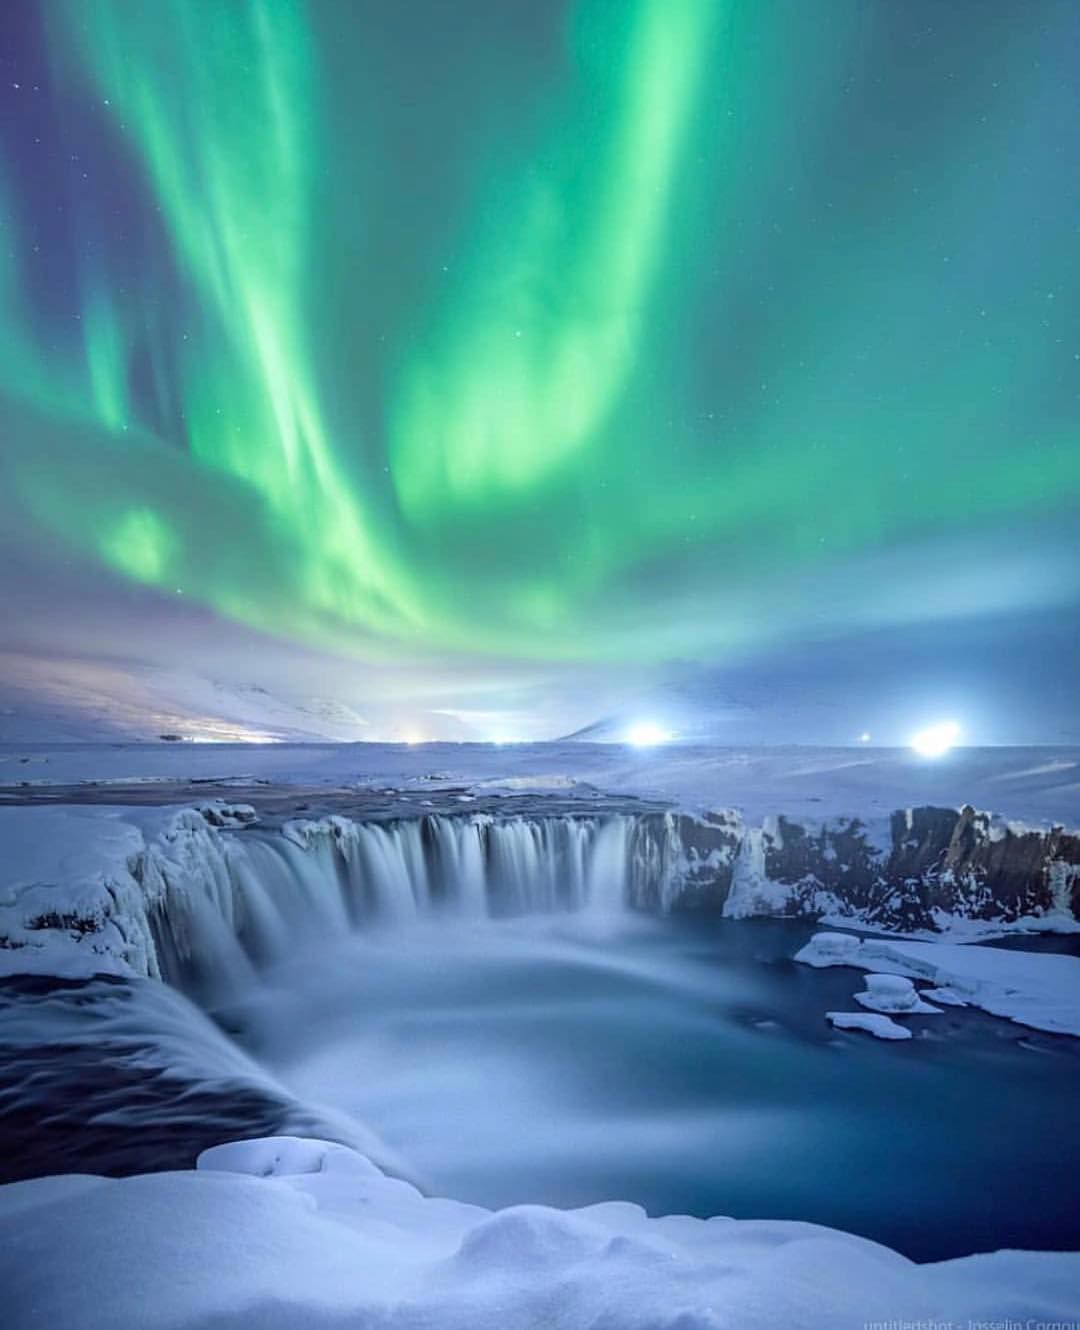 Goðafoss waterfall, Iceland under the northern lights.